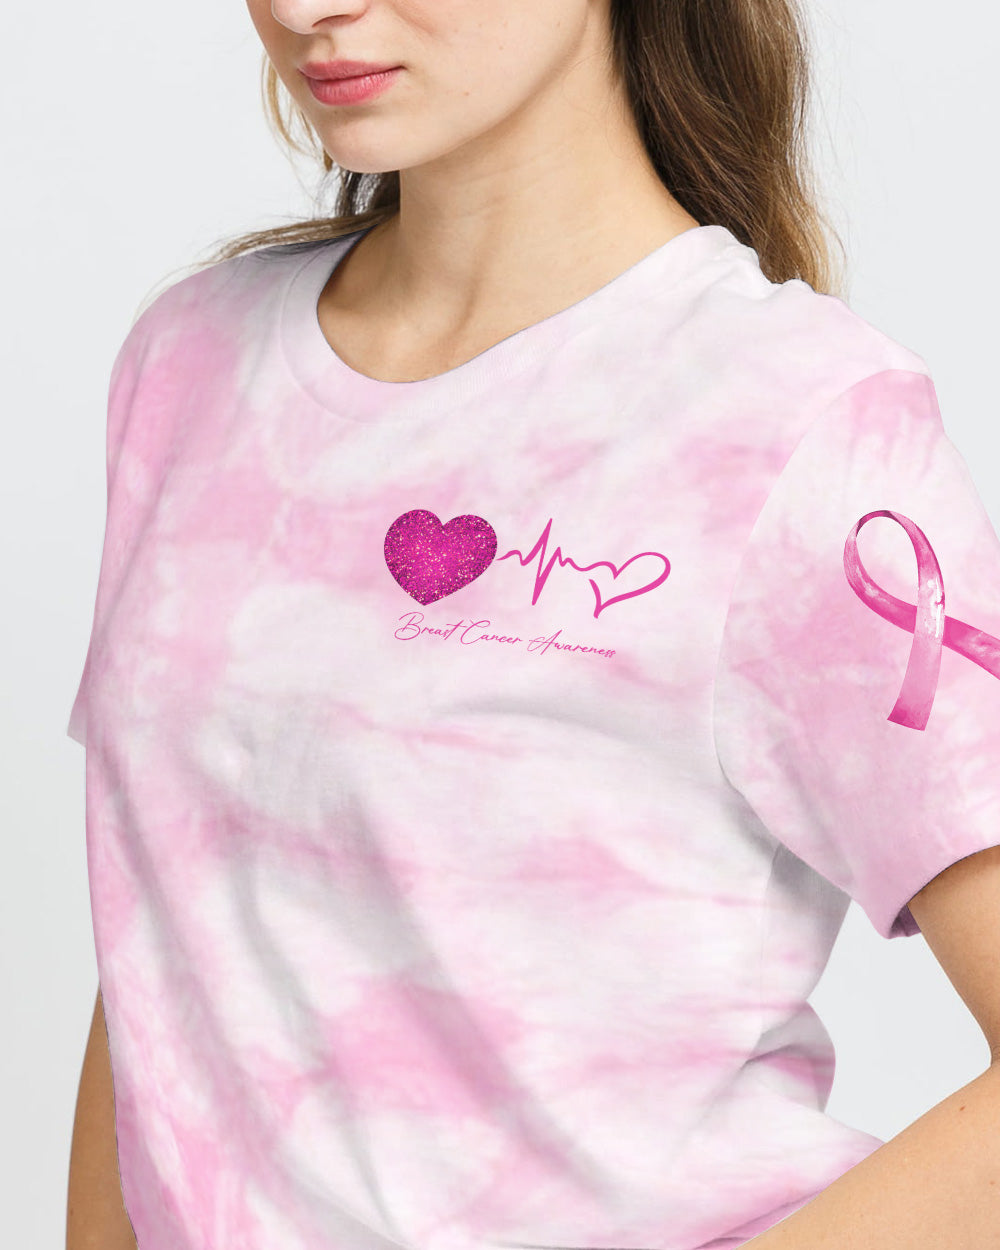 Think Pink Love Pink Wear Pink Women's Breast Cancer Awareness Tshirt